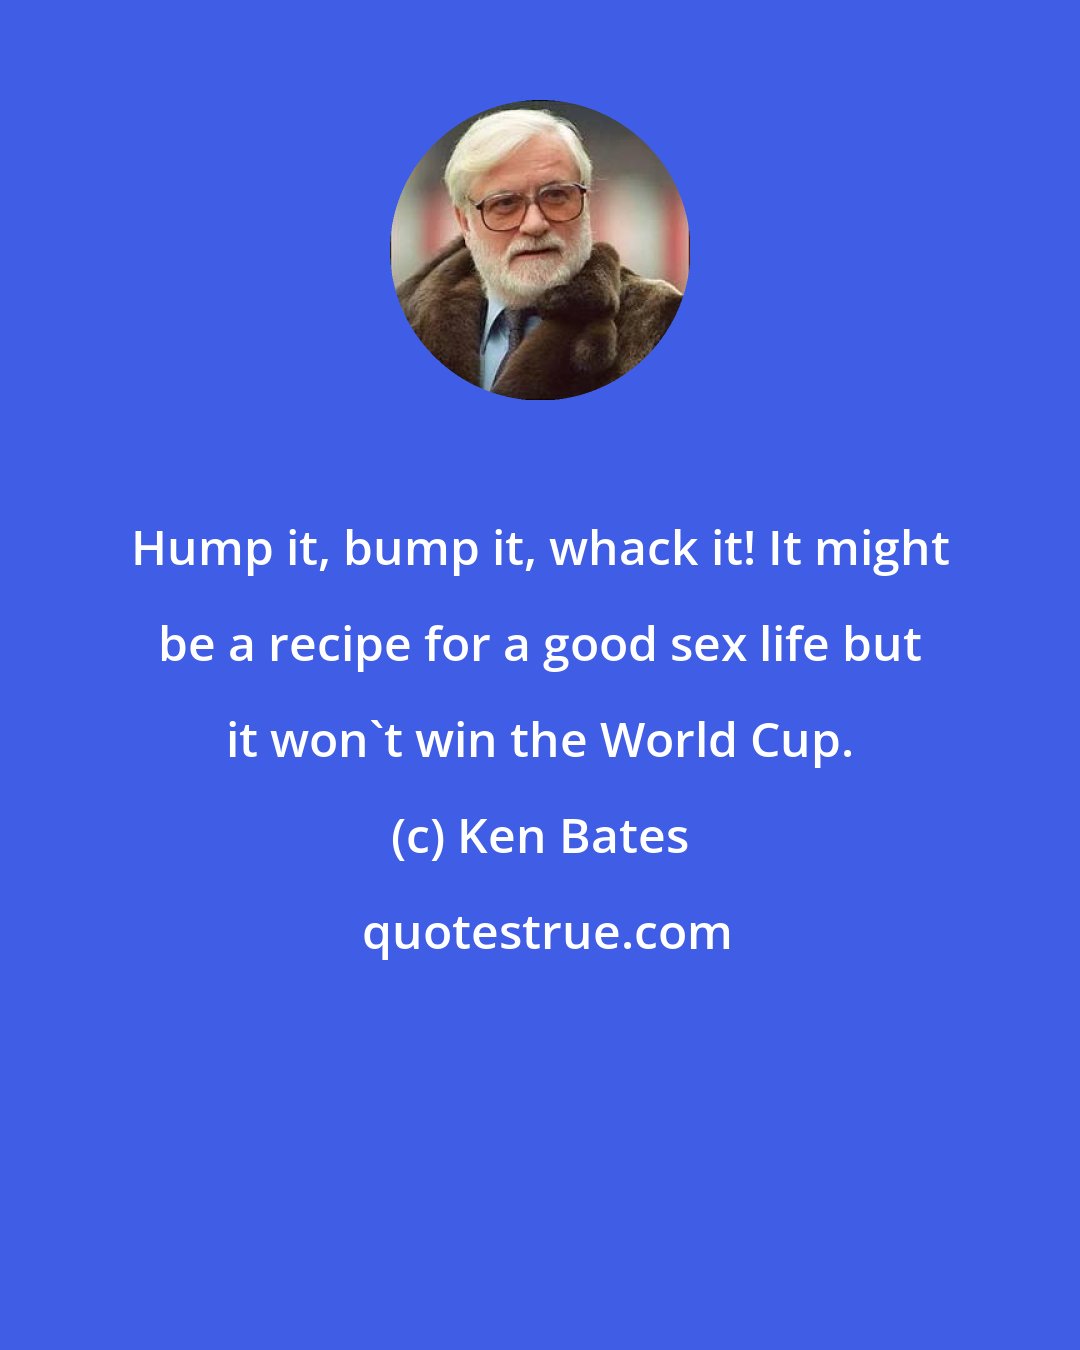 Ken Bates: Hump it, bump it, whack it! It might be a recipe for a good sex life but it won't win the World Cup.